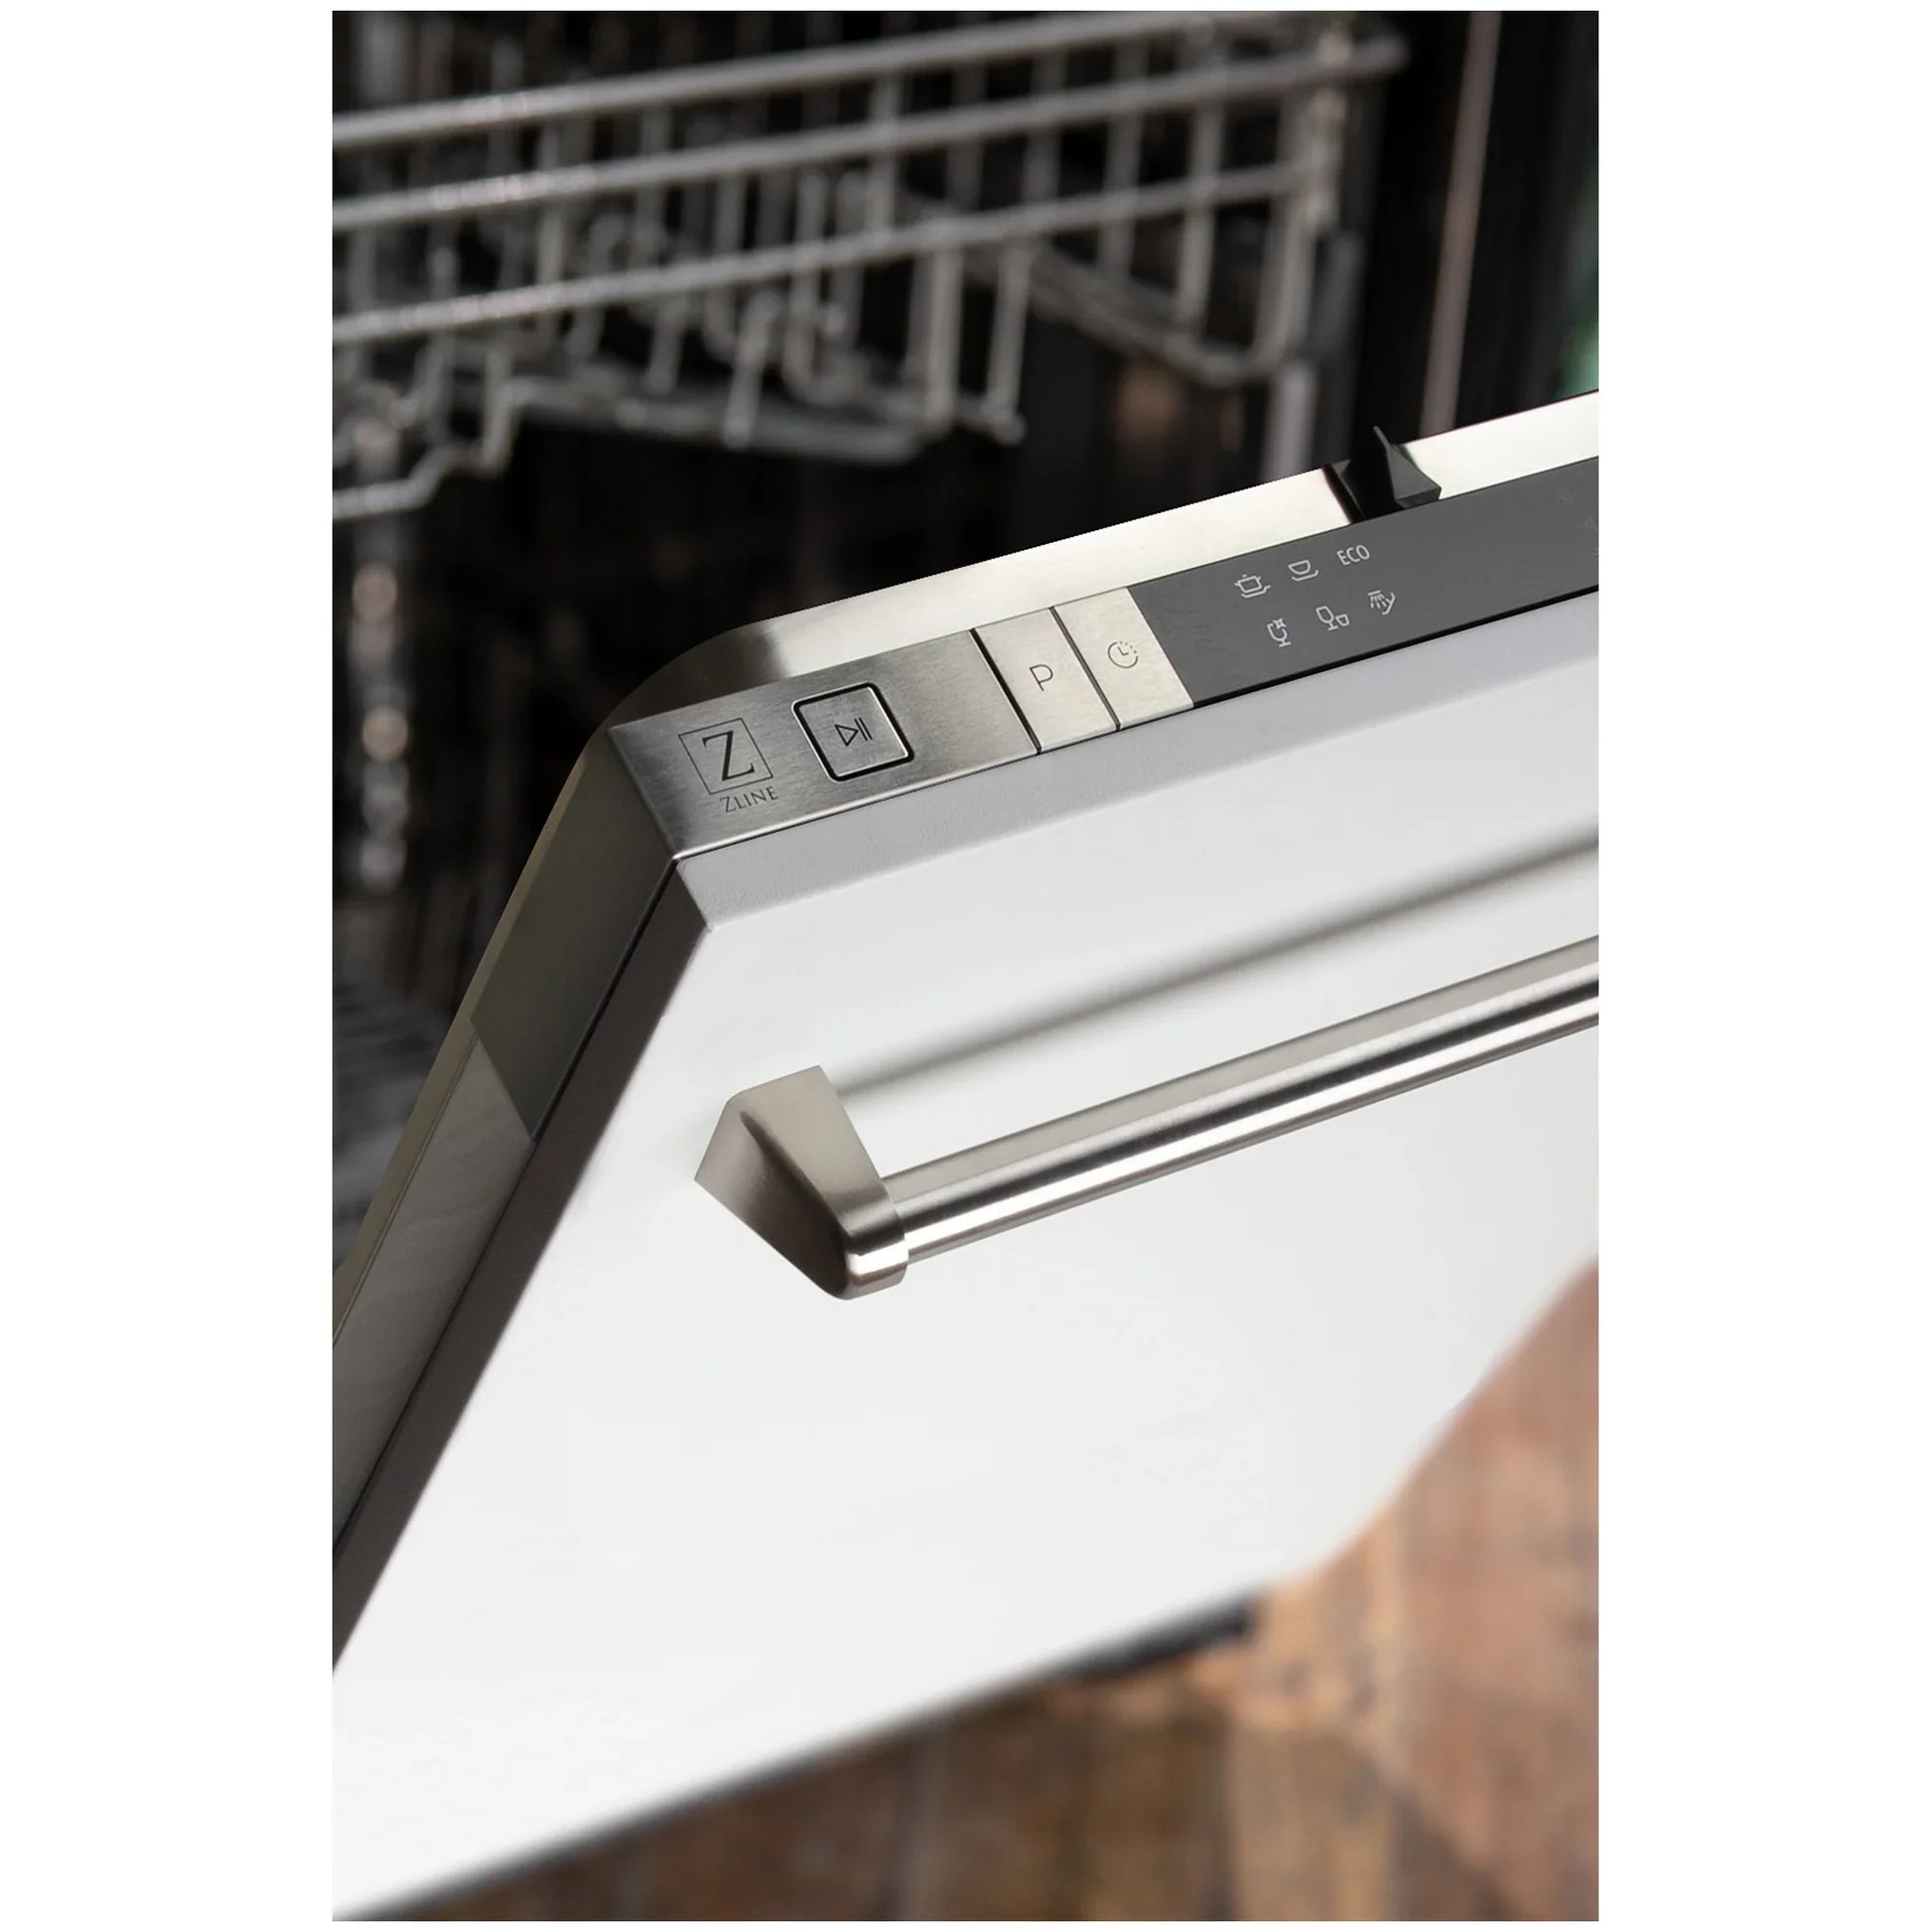 ZLINE 18" Compact Top Control Dishwasher - Matte White Panel, Traditional Handle